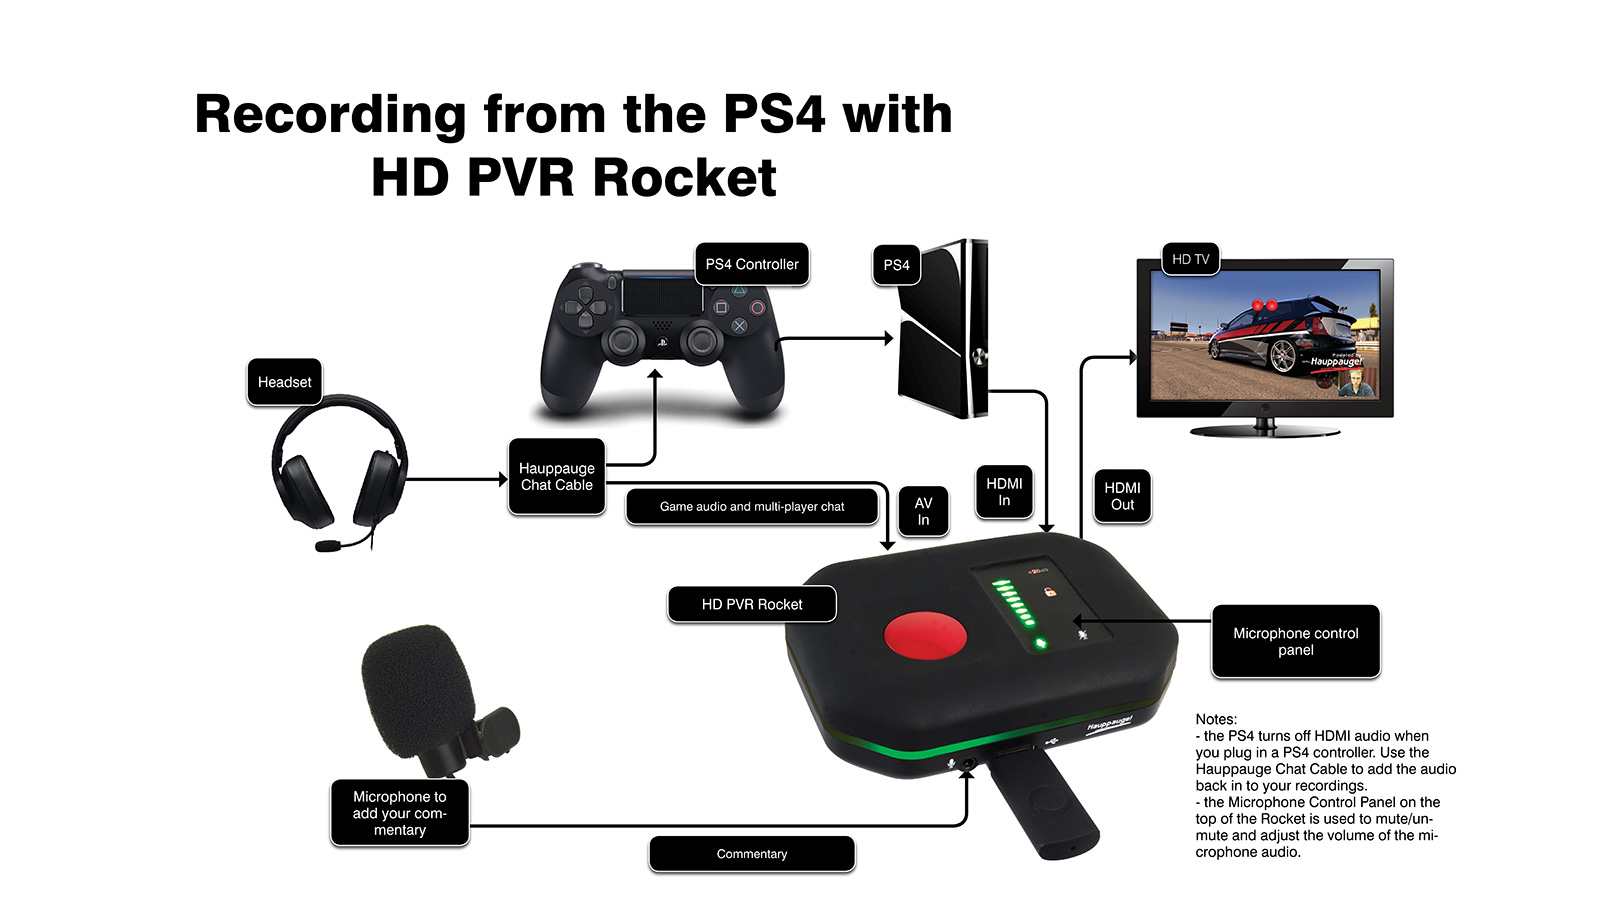 Connecting Rocket to a PS4